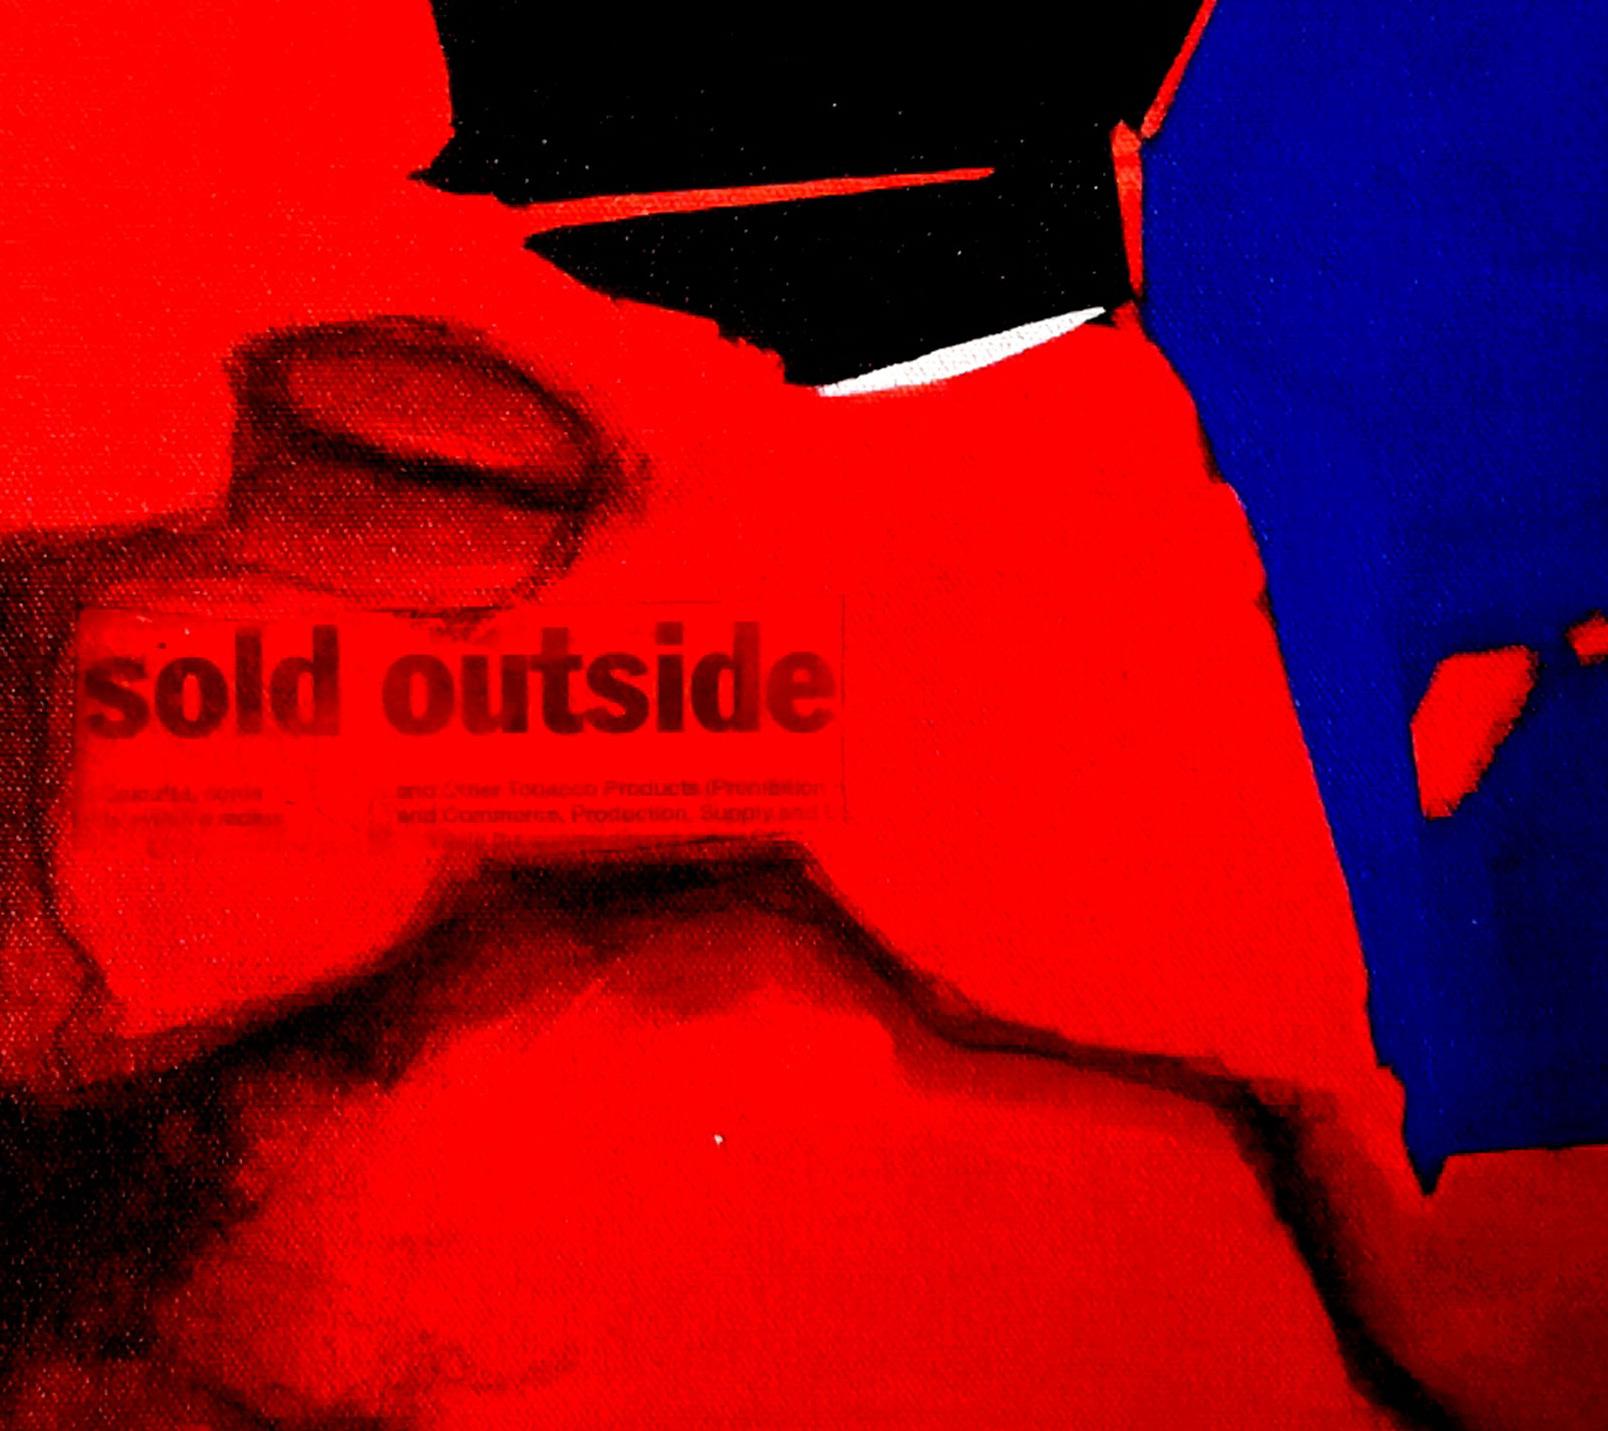 Sold Outside, Abstract, Mixed Media on Canvas, Red, Black, Blue 